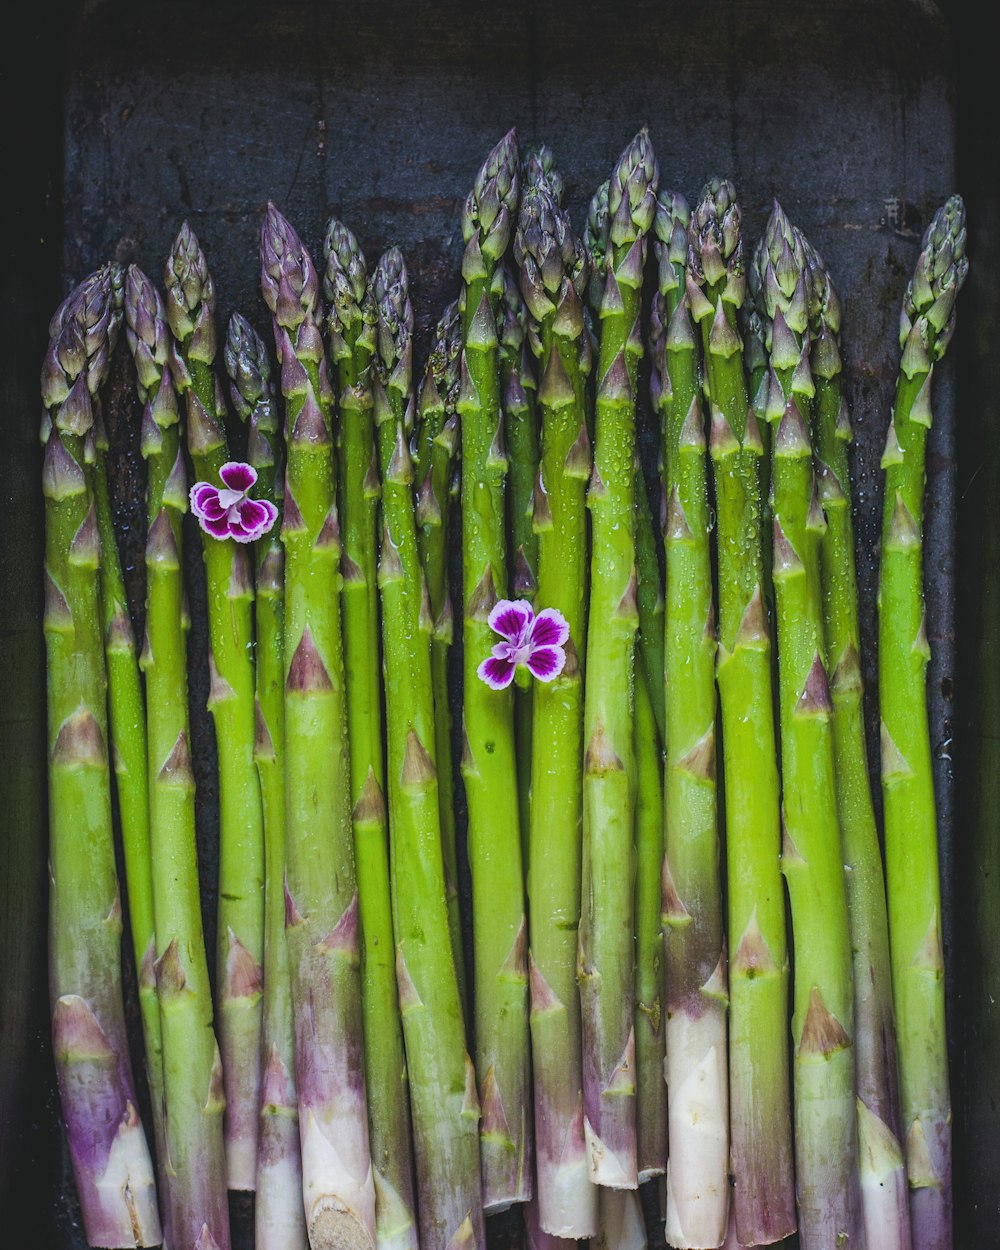 a bunch of asparagus with purple flowers on them